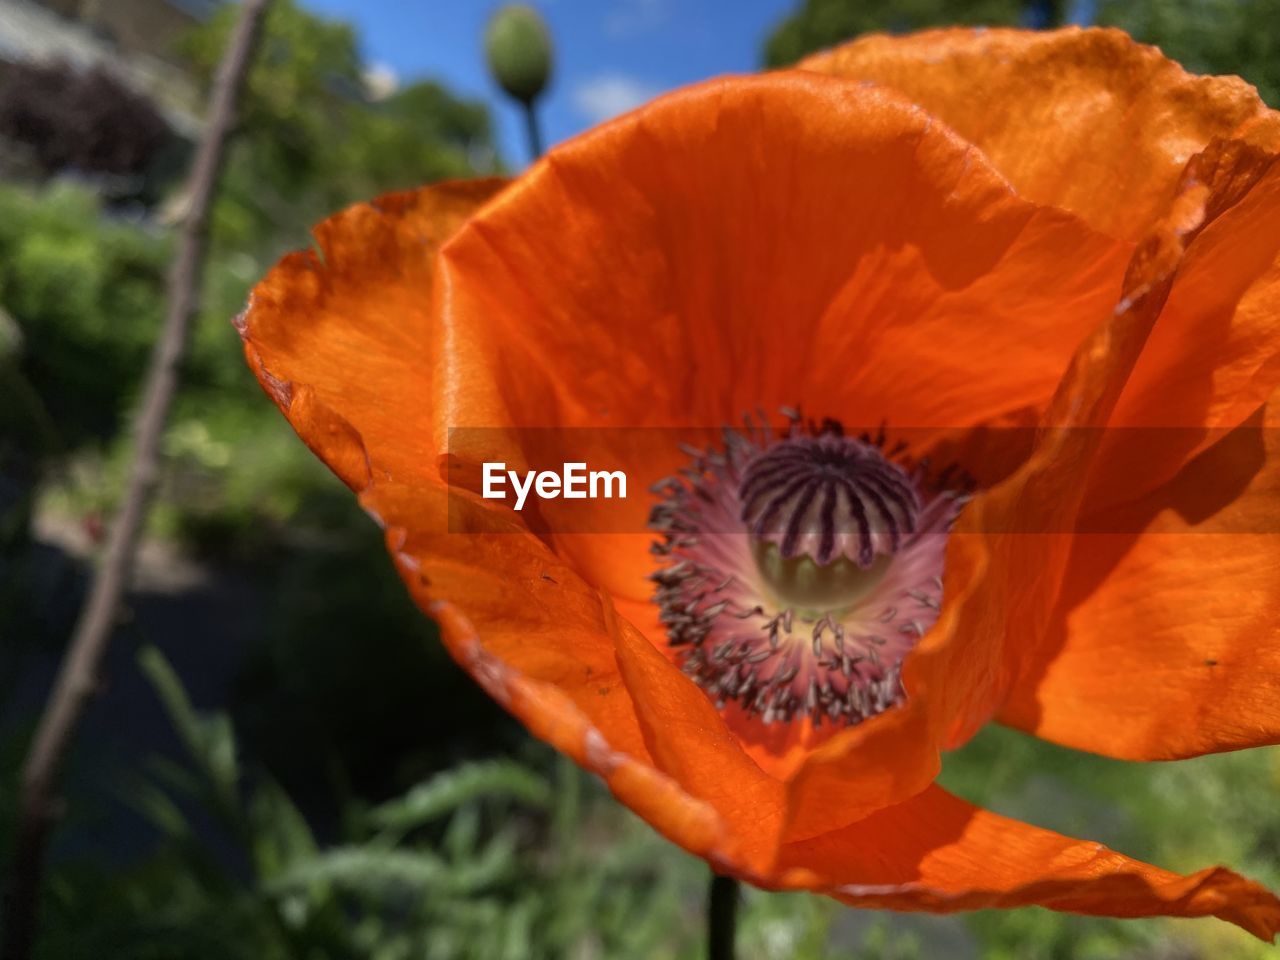 poppy, flower, plant, flowering plant, freshness, close-up, petal, beauty in nature, nature, flower head, inflorescence, growth, orange color, fragility, macro photography, no people, wildflower, food, pollen, outdoors, focus on foreground, day, yellow, leaf, botany, plant part, blossom, plant stem